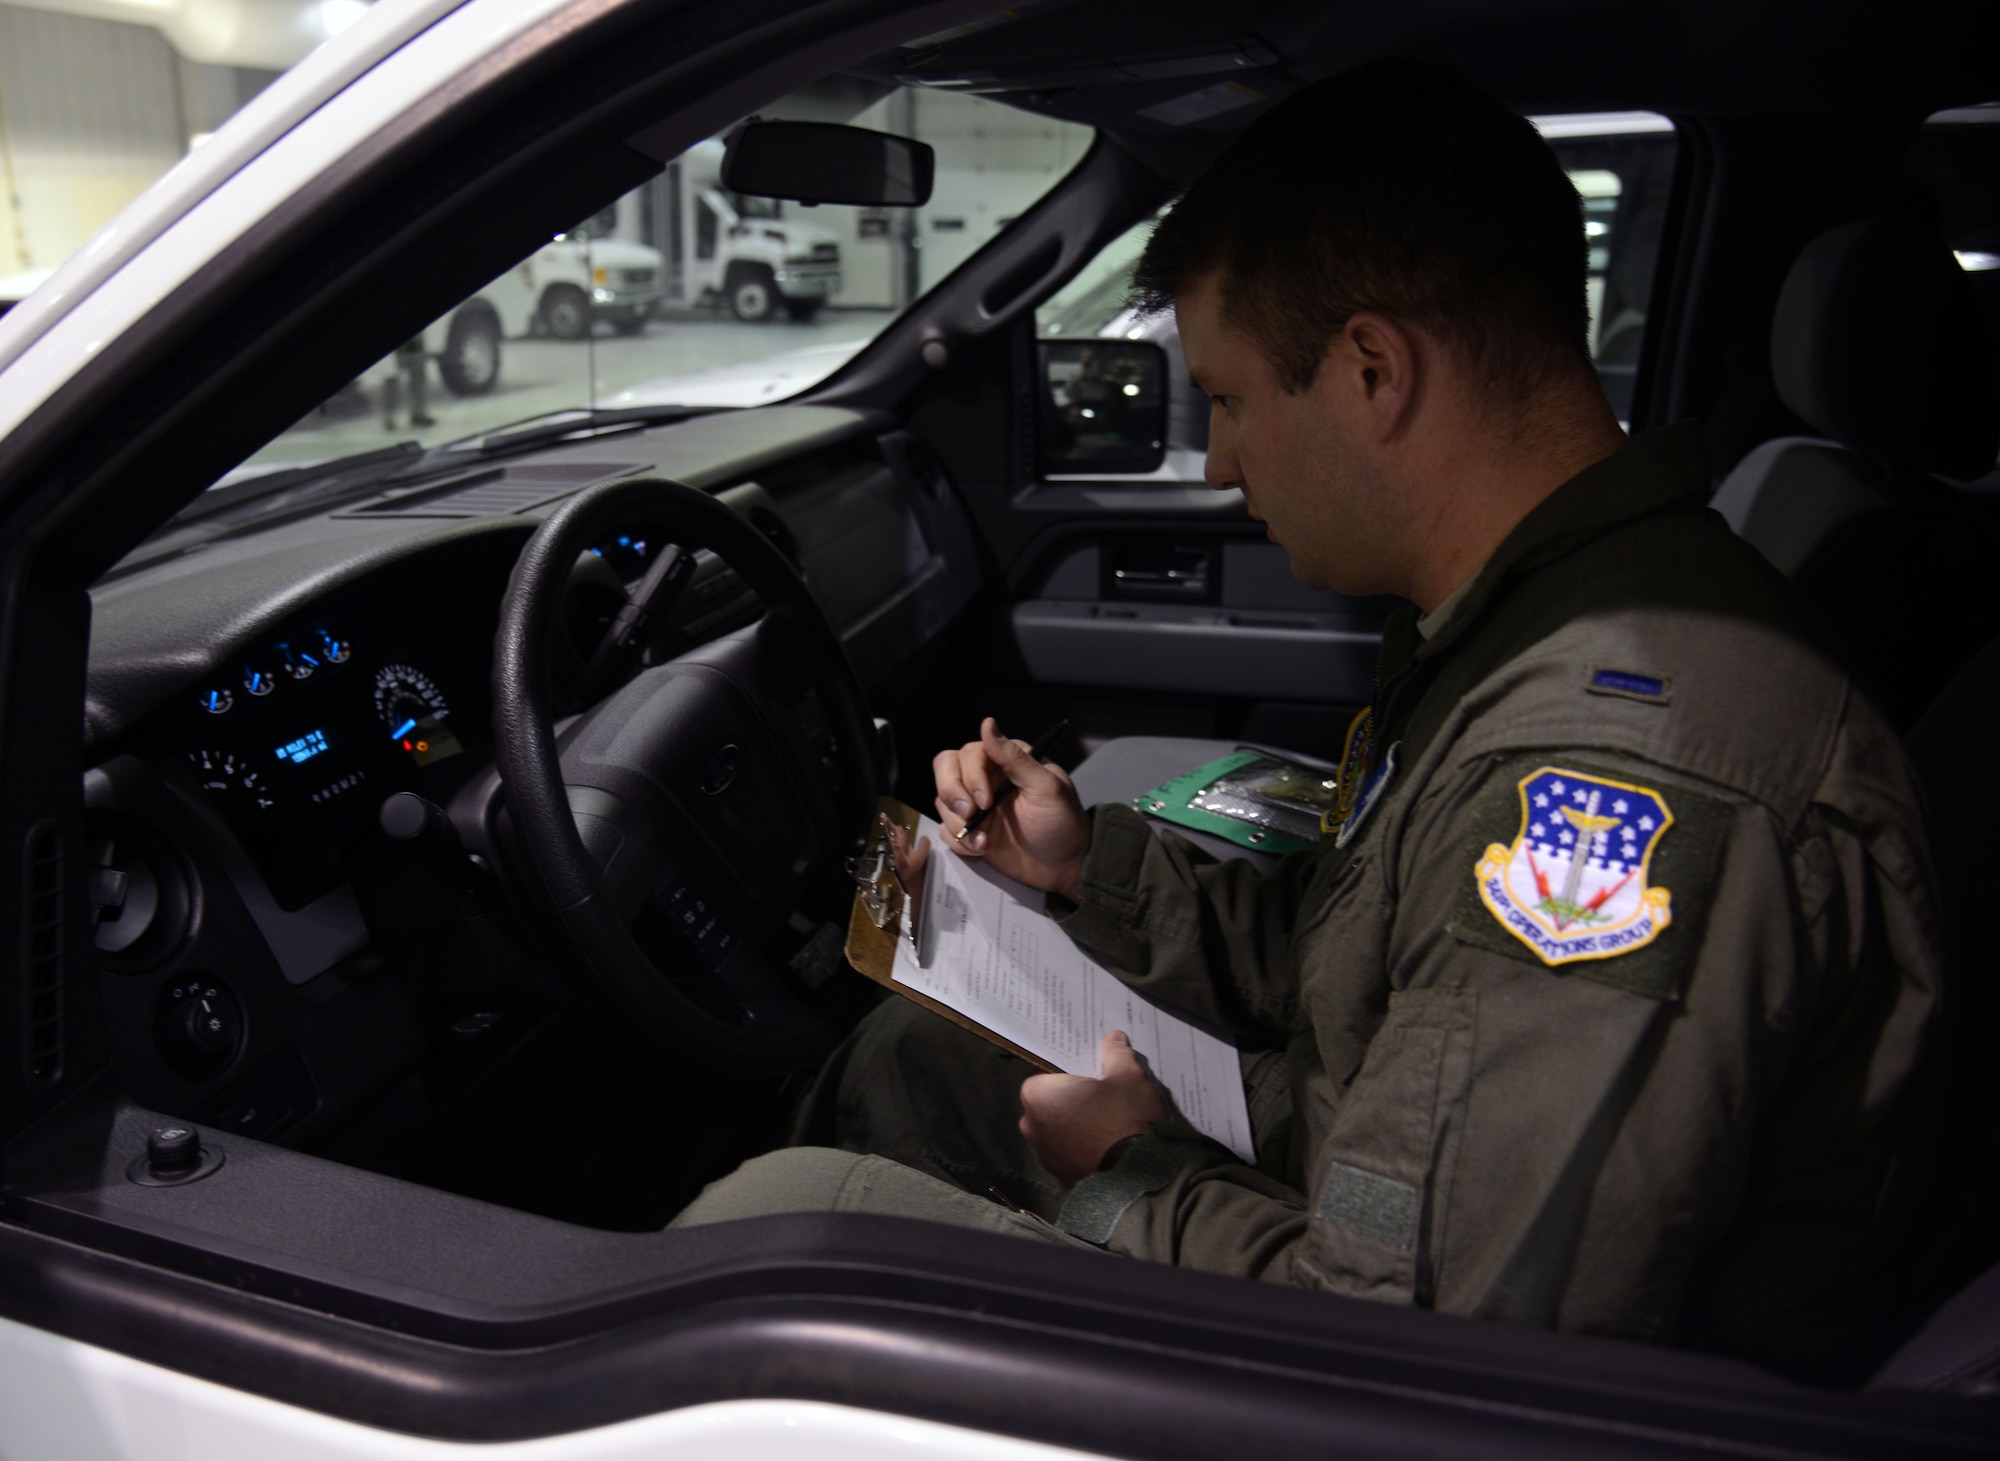 1st Lt. Will Coley, 10th Missile Squadron deputy flight commander, inspects a vehicle March 16, 2015, at Malmstrom Air Force Base, Mont. Coley inspects each vehicle he takes to the missile field prior to his departure. (U.S. Air Force photo/ Airman 1st Class Dillon Johnston)